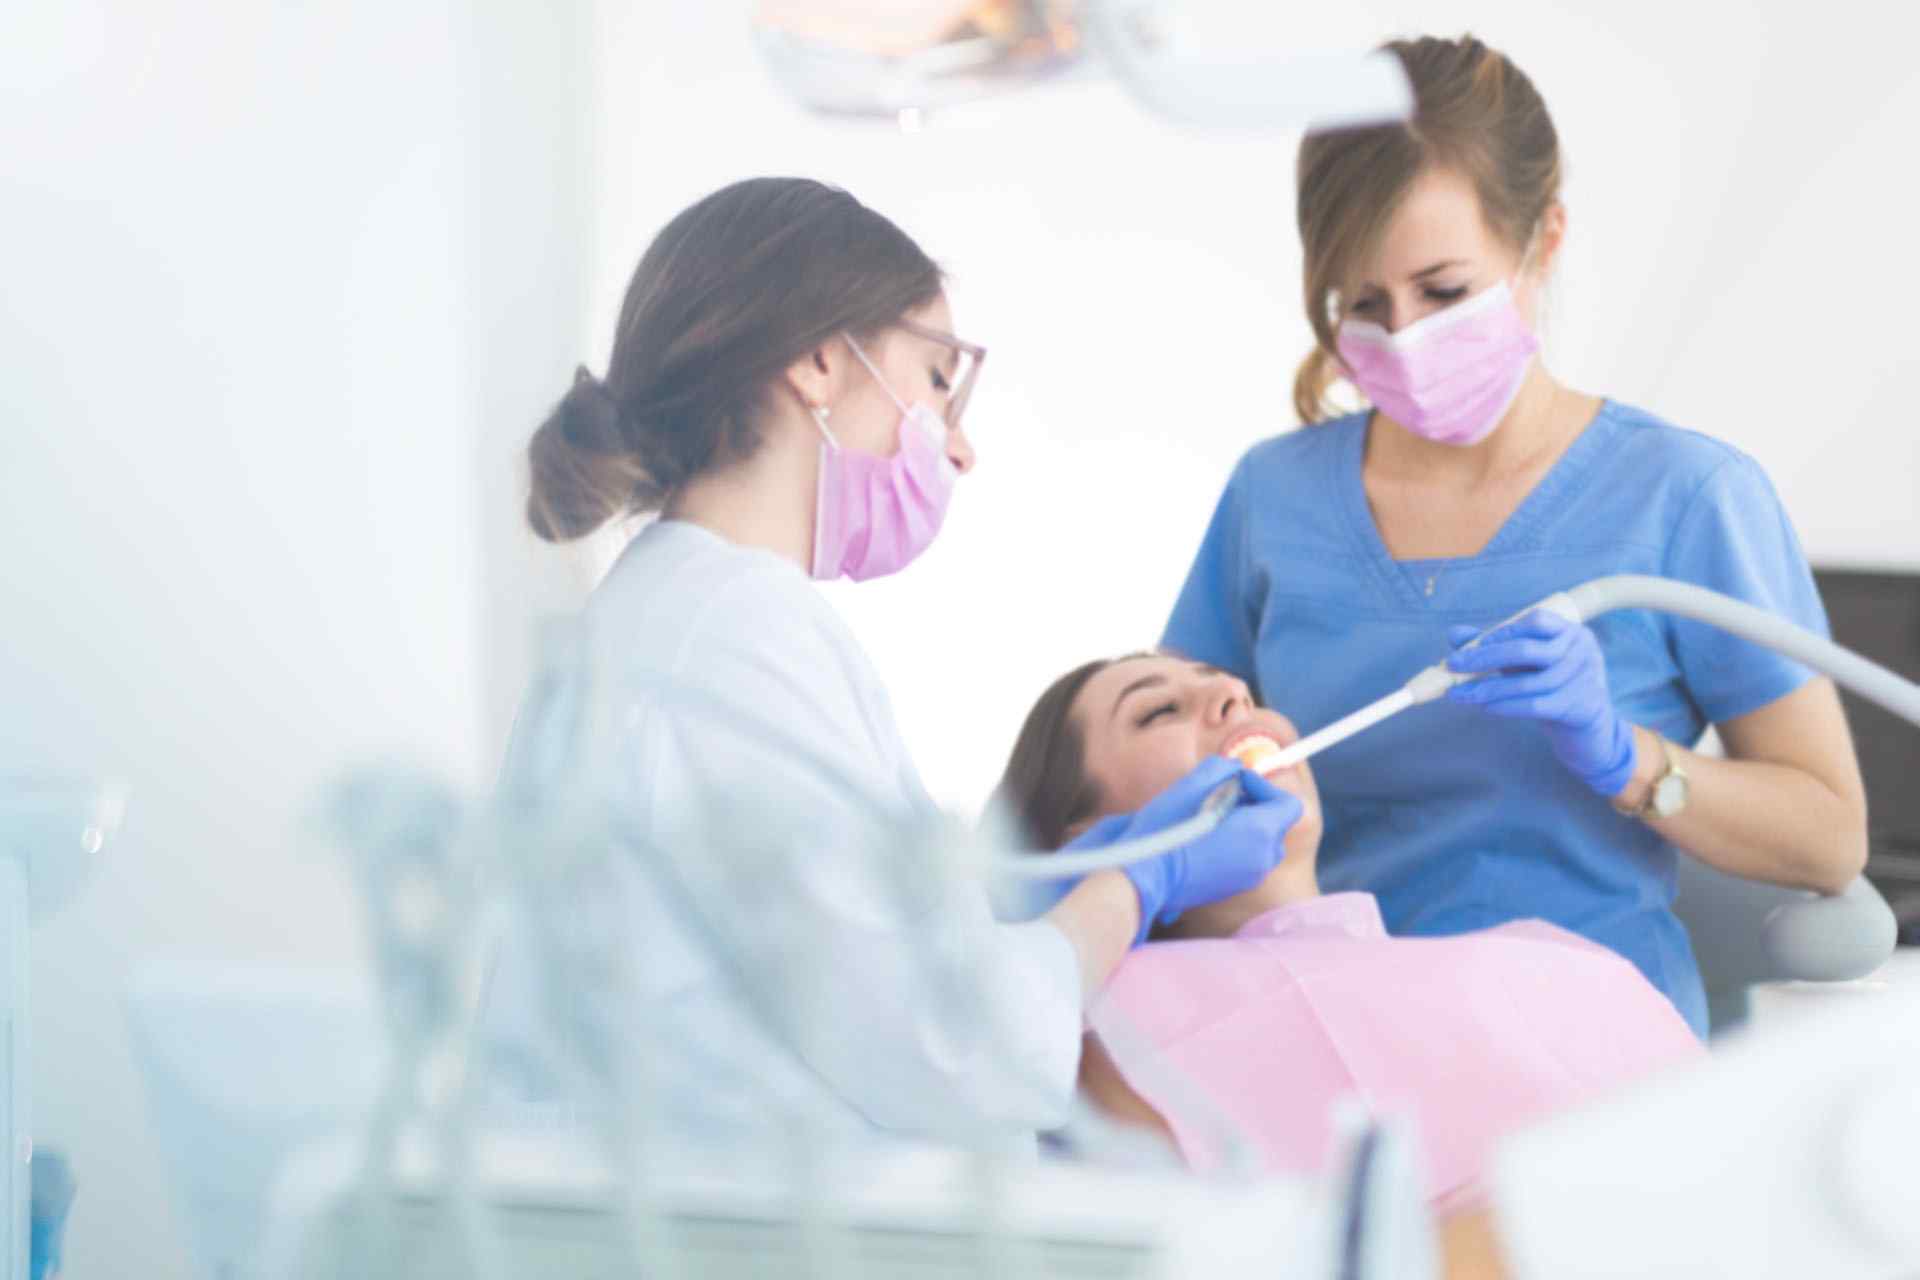 https://emergencydentistclearwaterfl.com/wp-content/uploads/2020/02/about_us_background.jpg